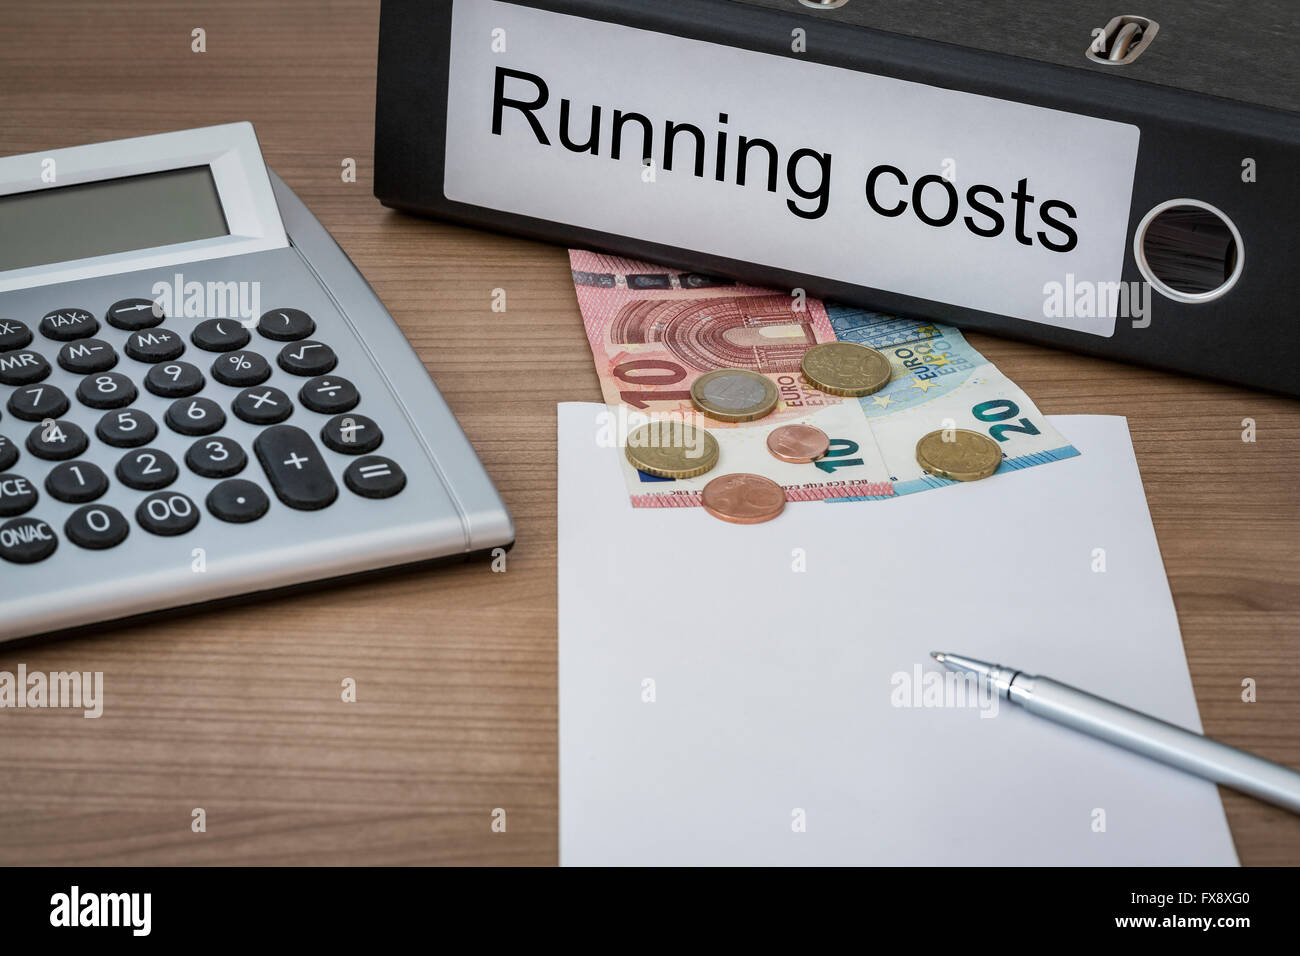 Running Costs written on a binder on a desk with euro money calculator blank sheet and pen Stock Photo